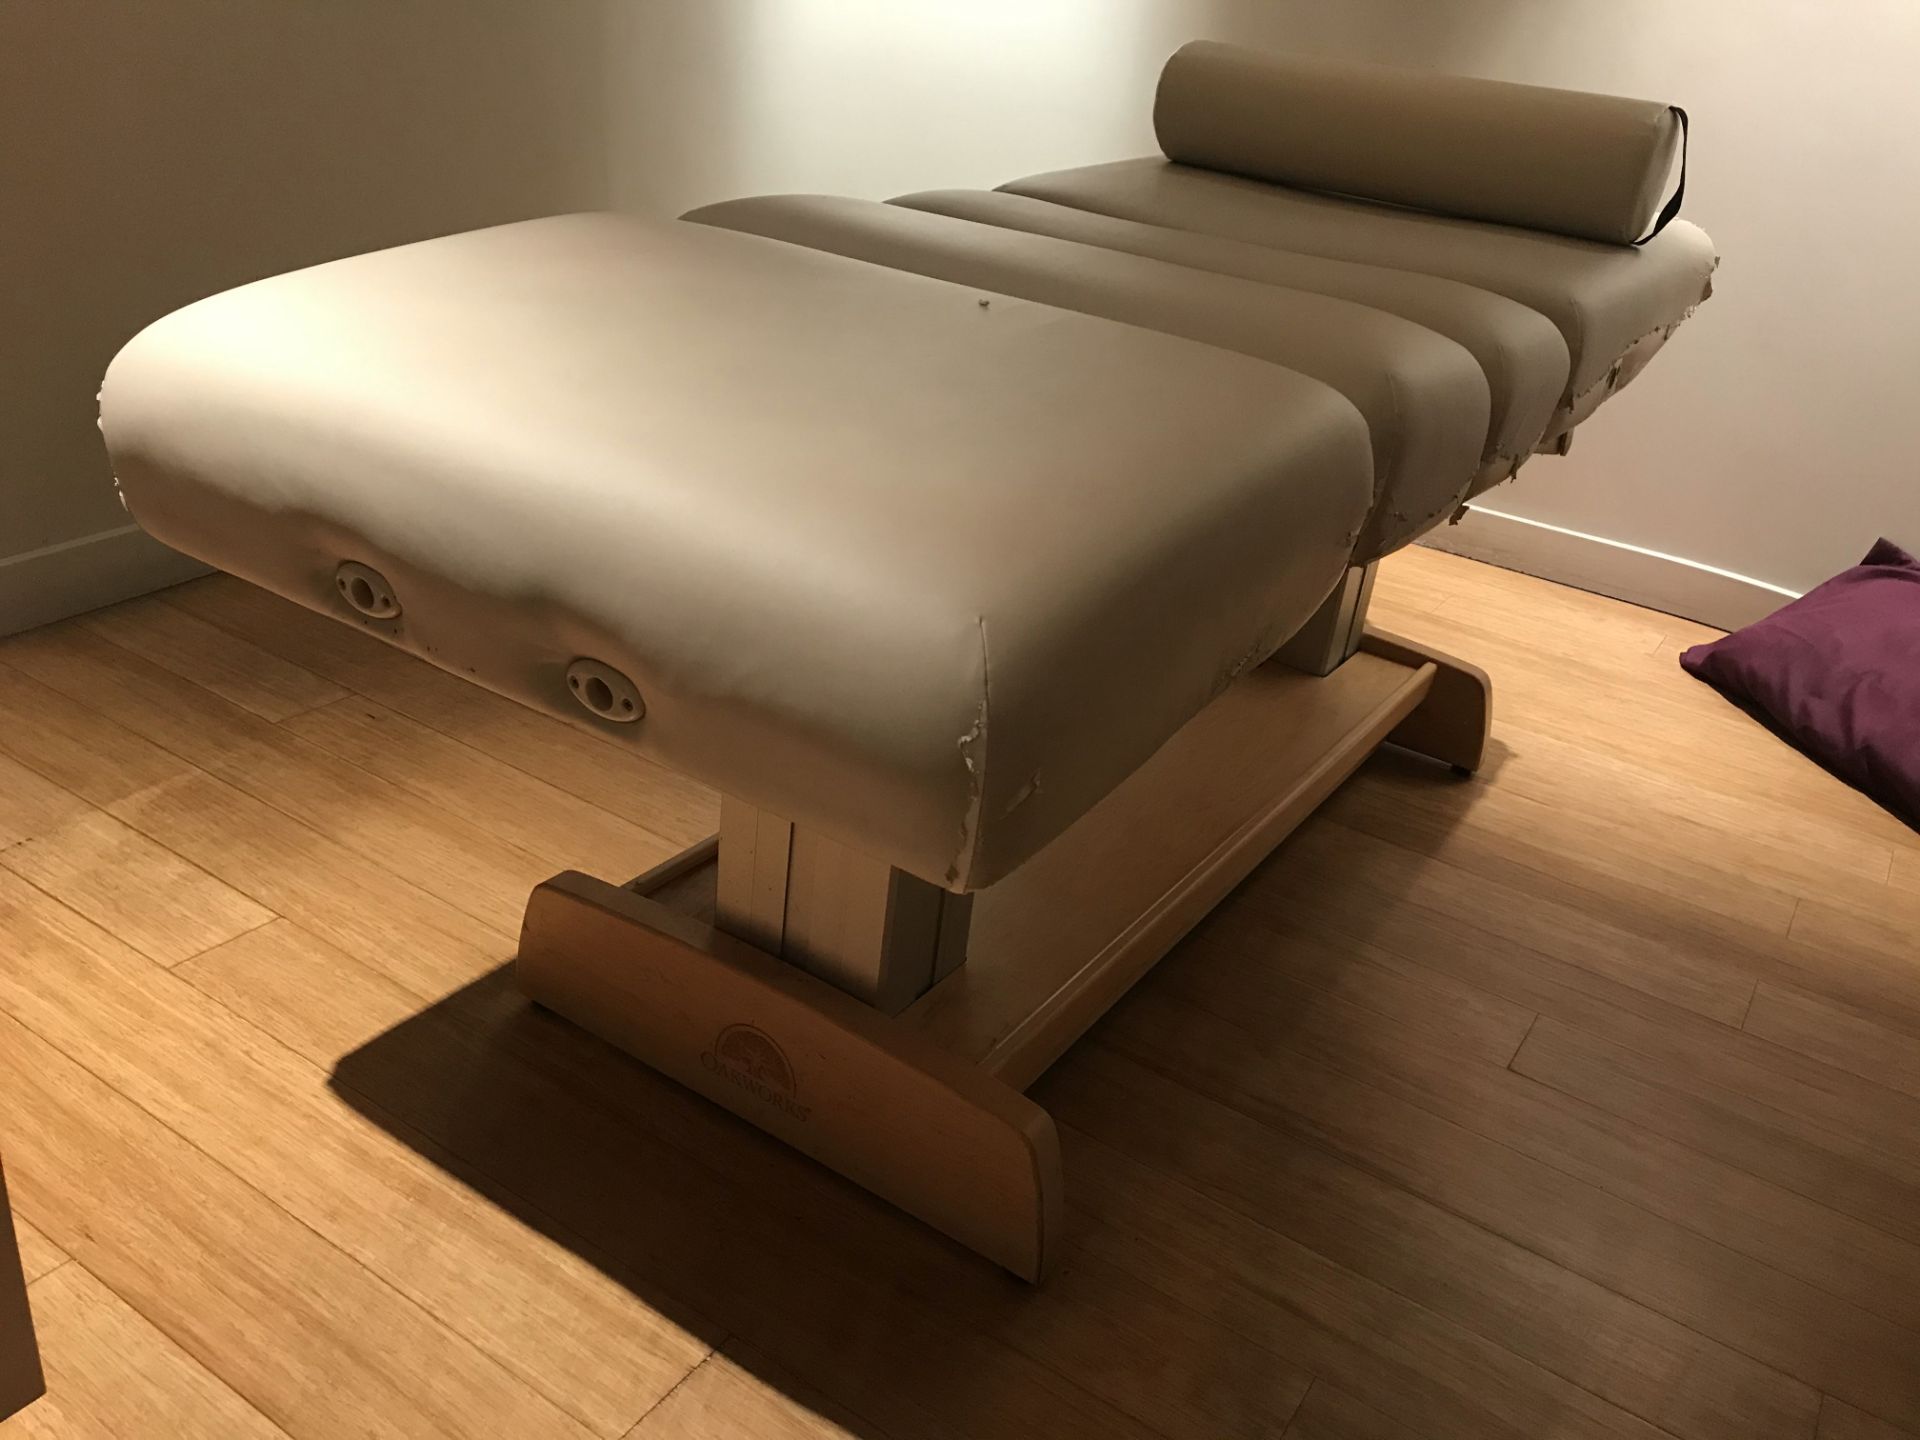 1 x Oakworks Clinician Electric-Hydraulic Massage Table With Footpedal and Linak HBWO Remote Control - Image 5 of 11